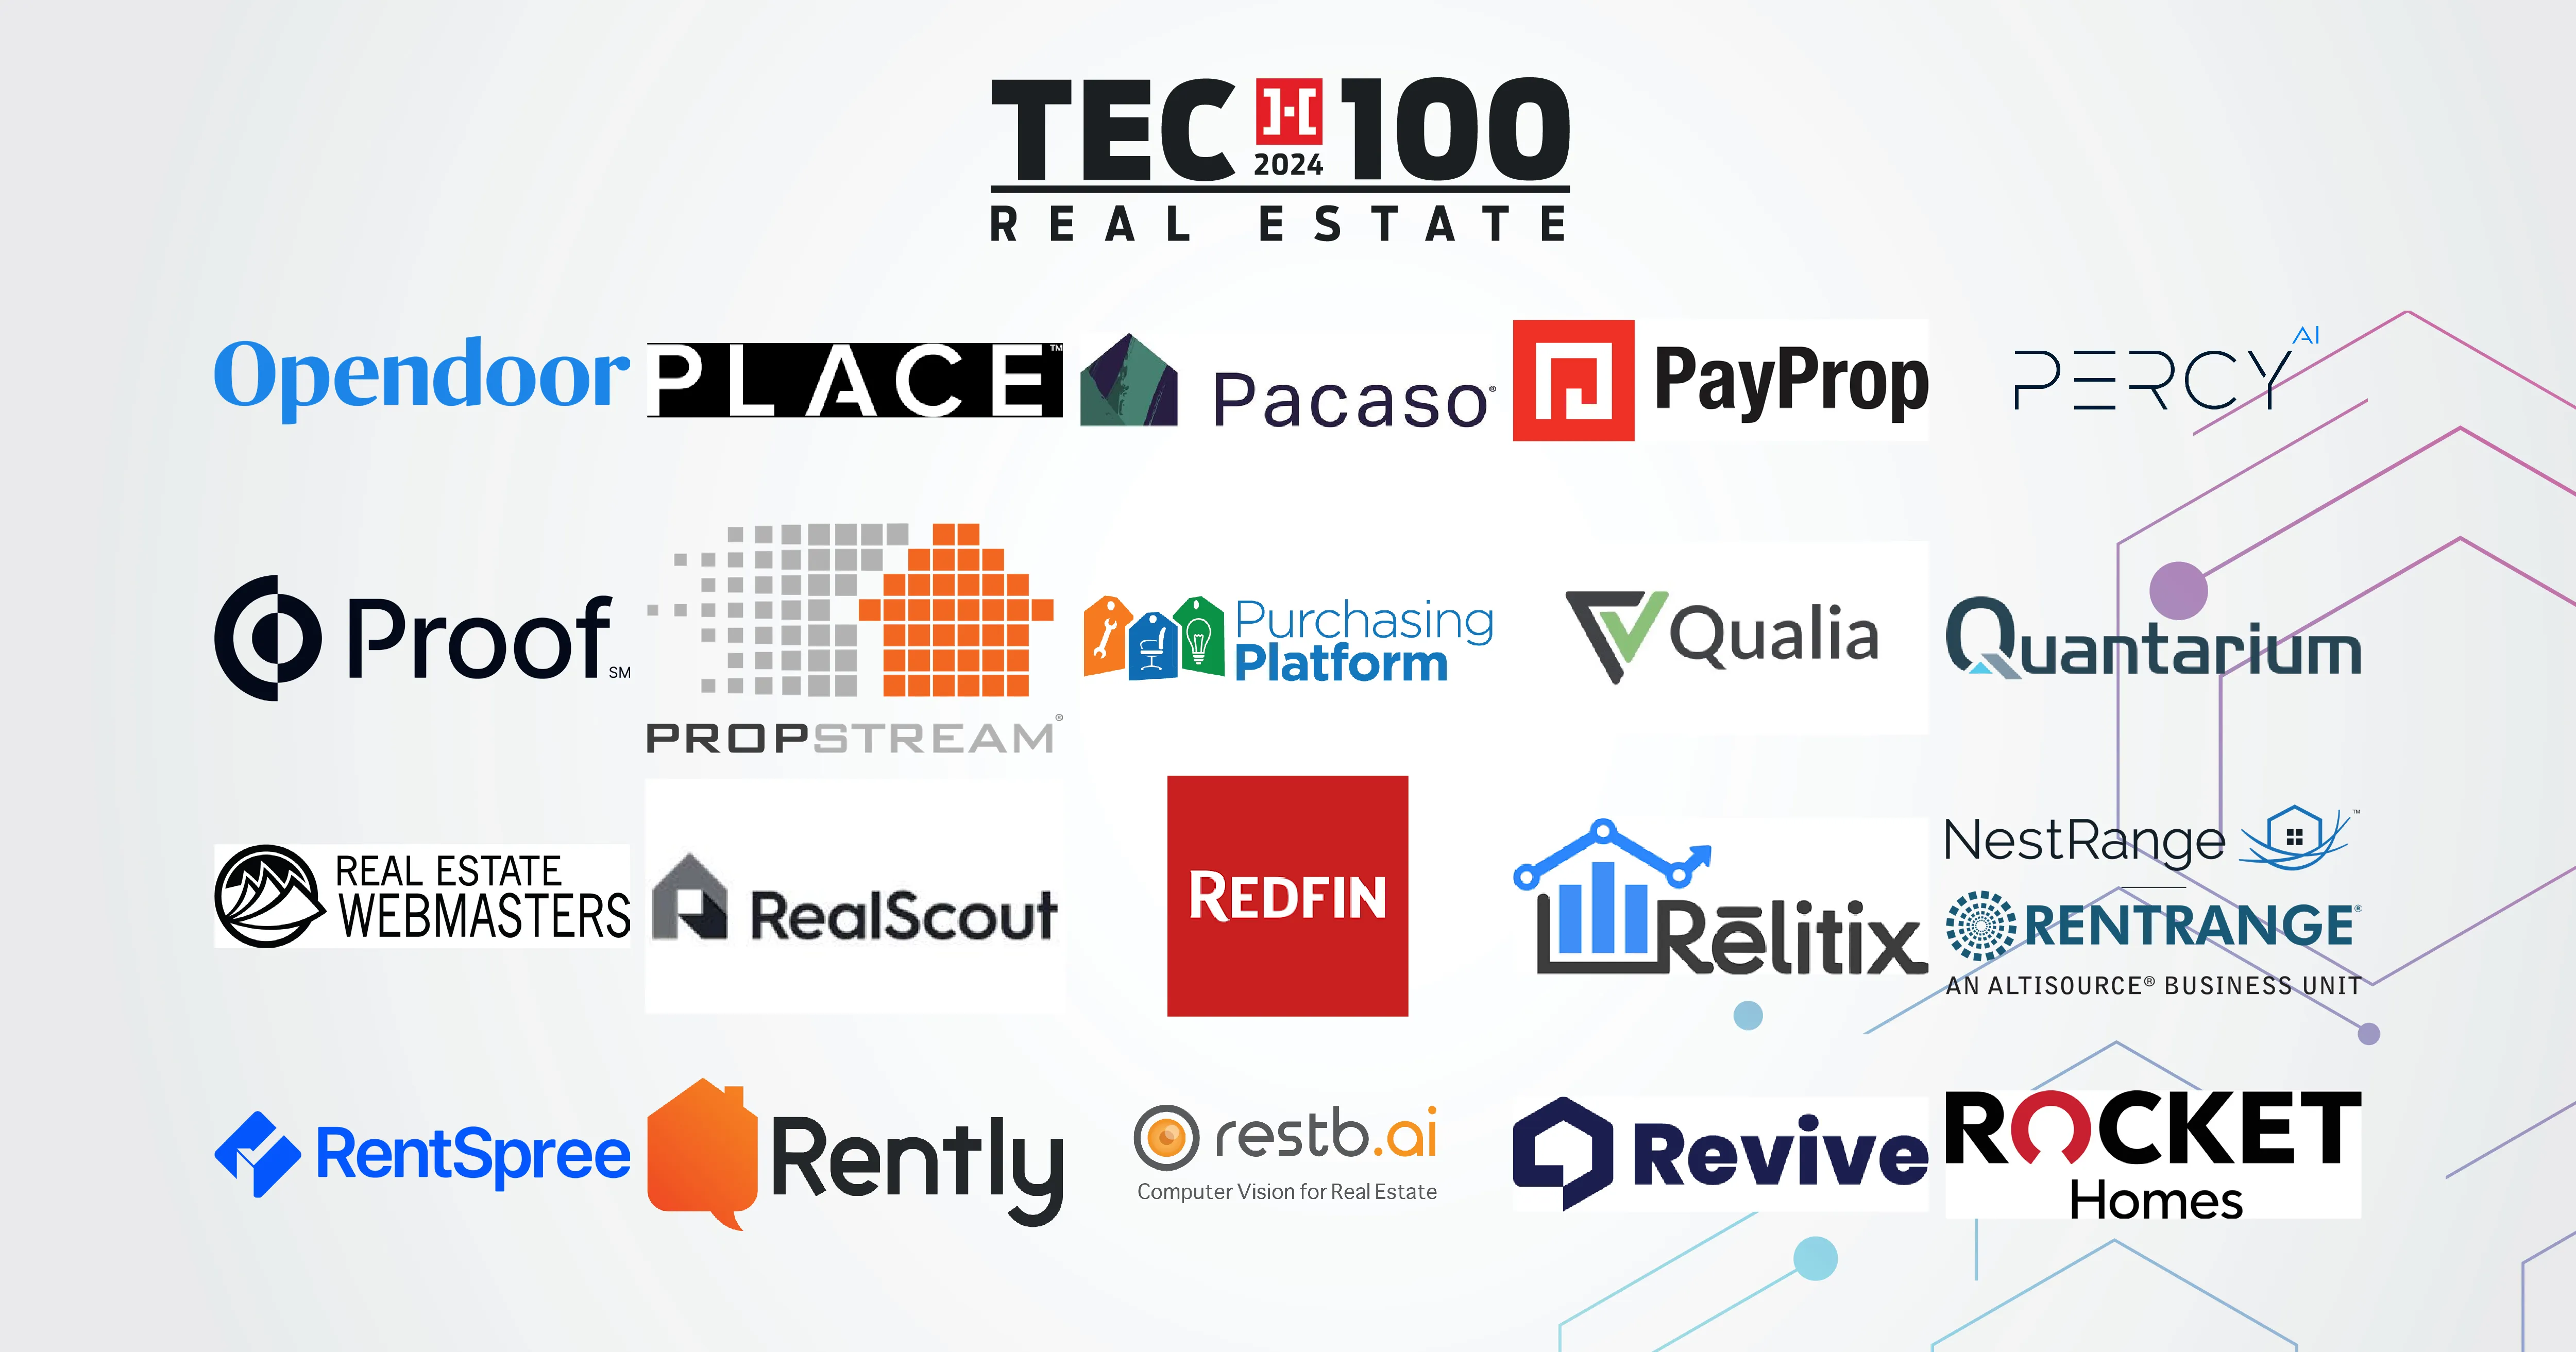 1200x630_Tec_100_Real_Estate_4_CORRECTION - updated RealScout